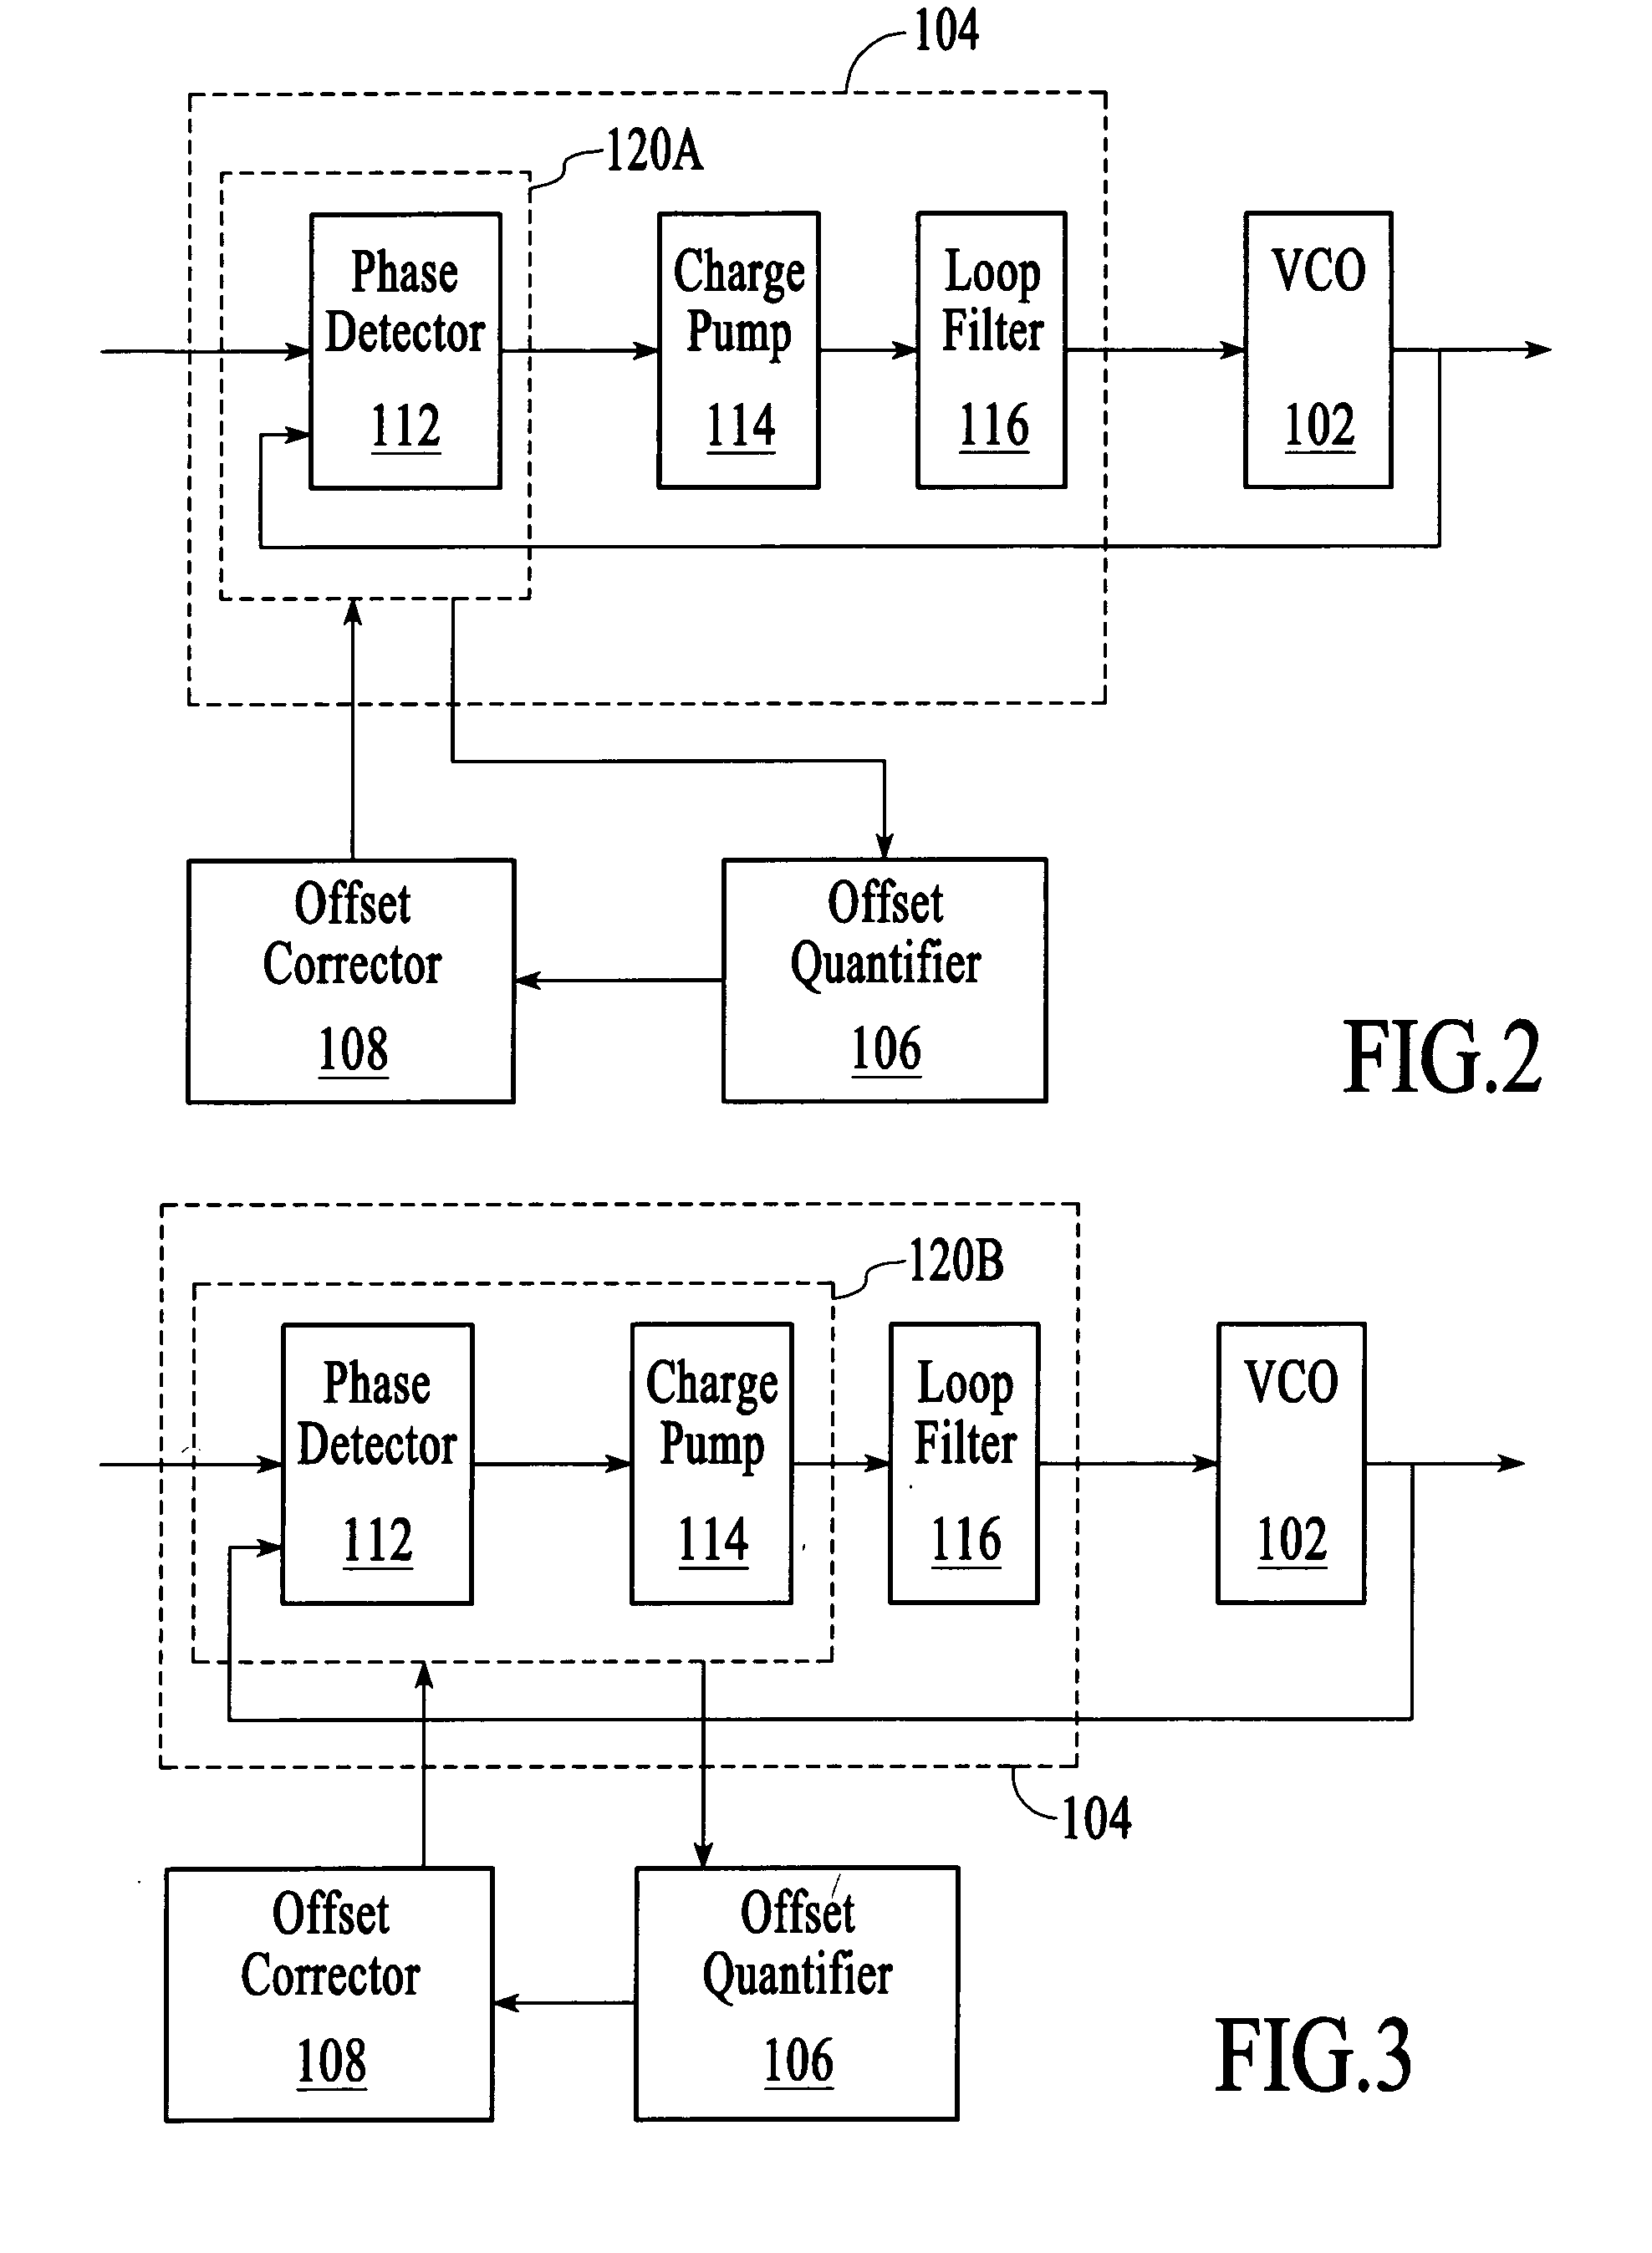 Offset correction in a feedback system for a voltage controlled oscillator